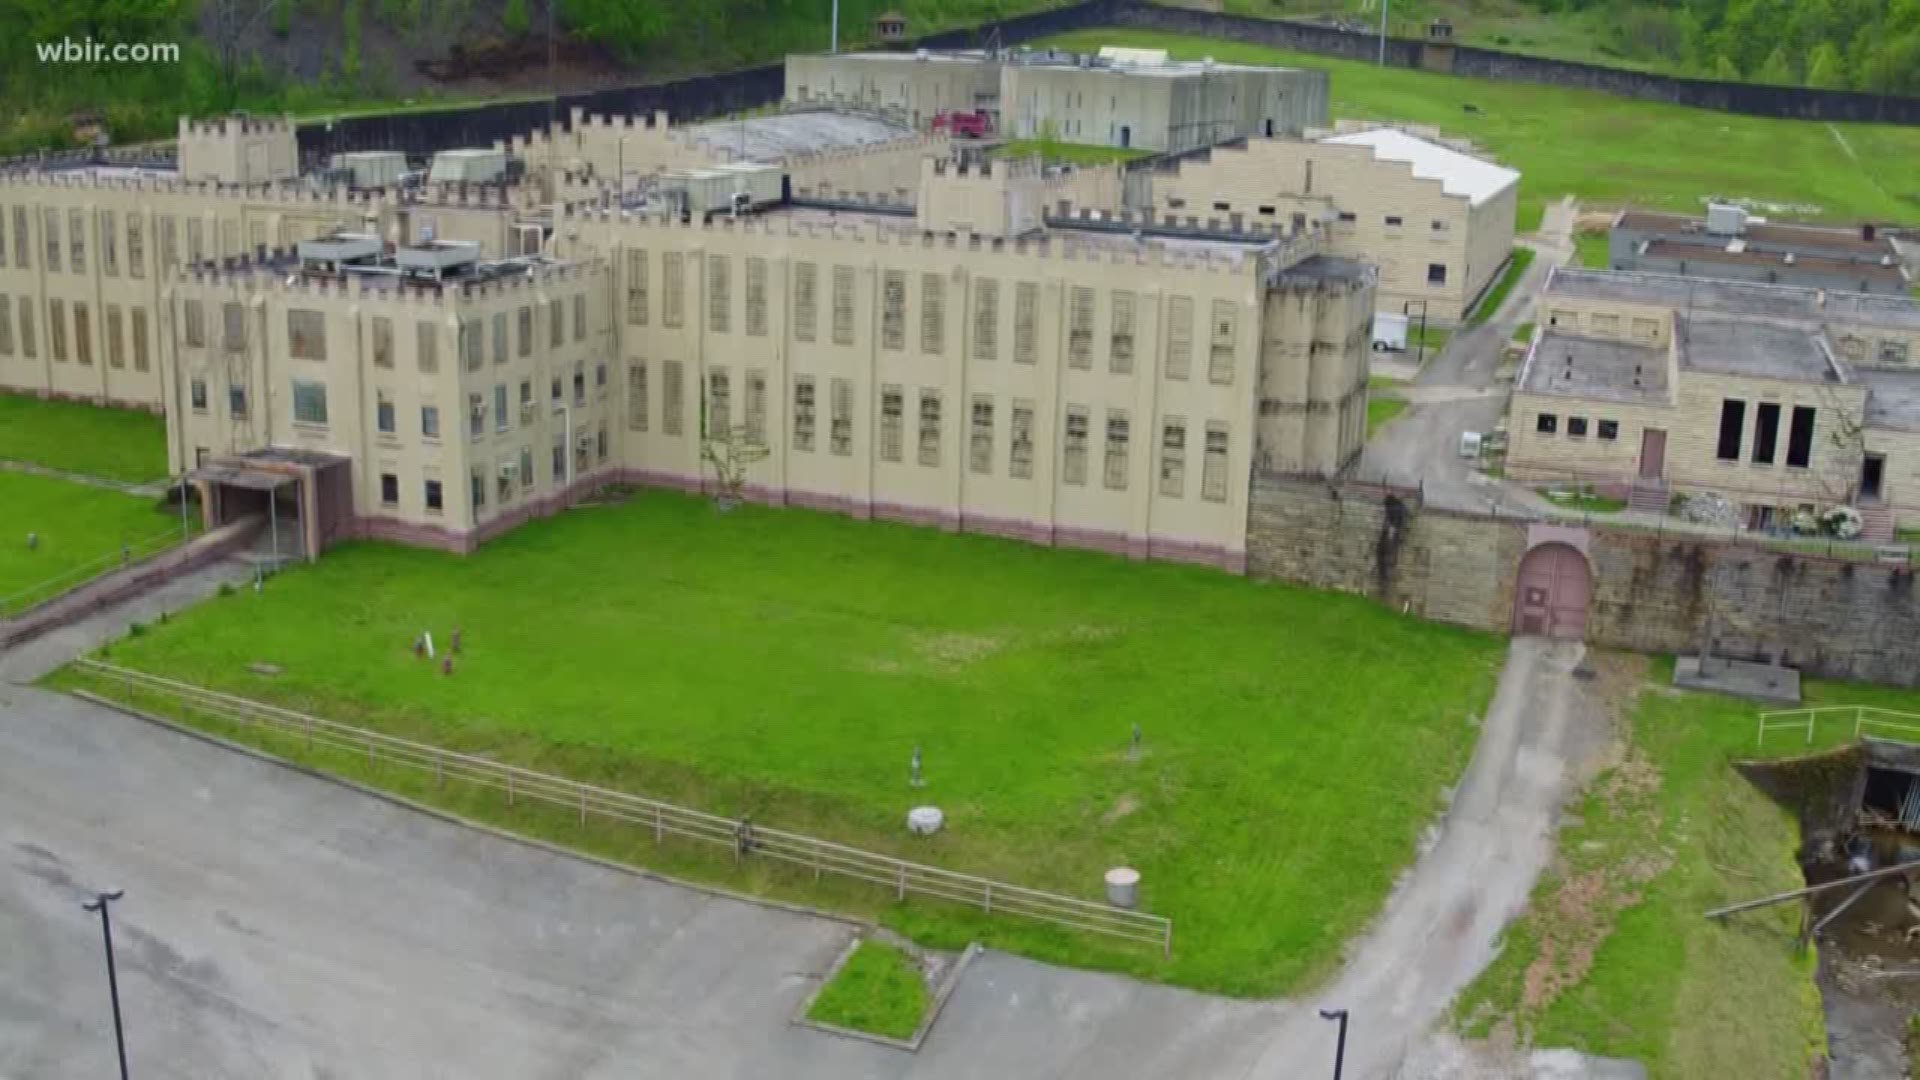 This weekend the former Brushy Mountain Prison holds its grand opening as a tourist attraction.